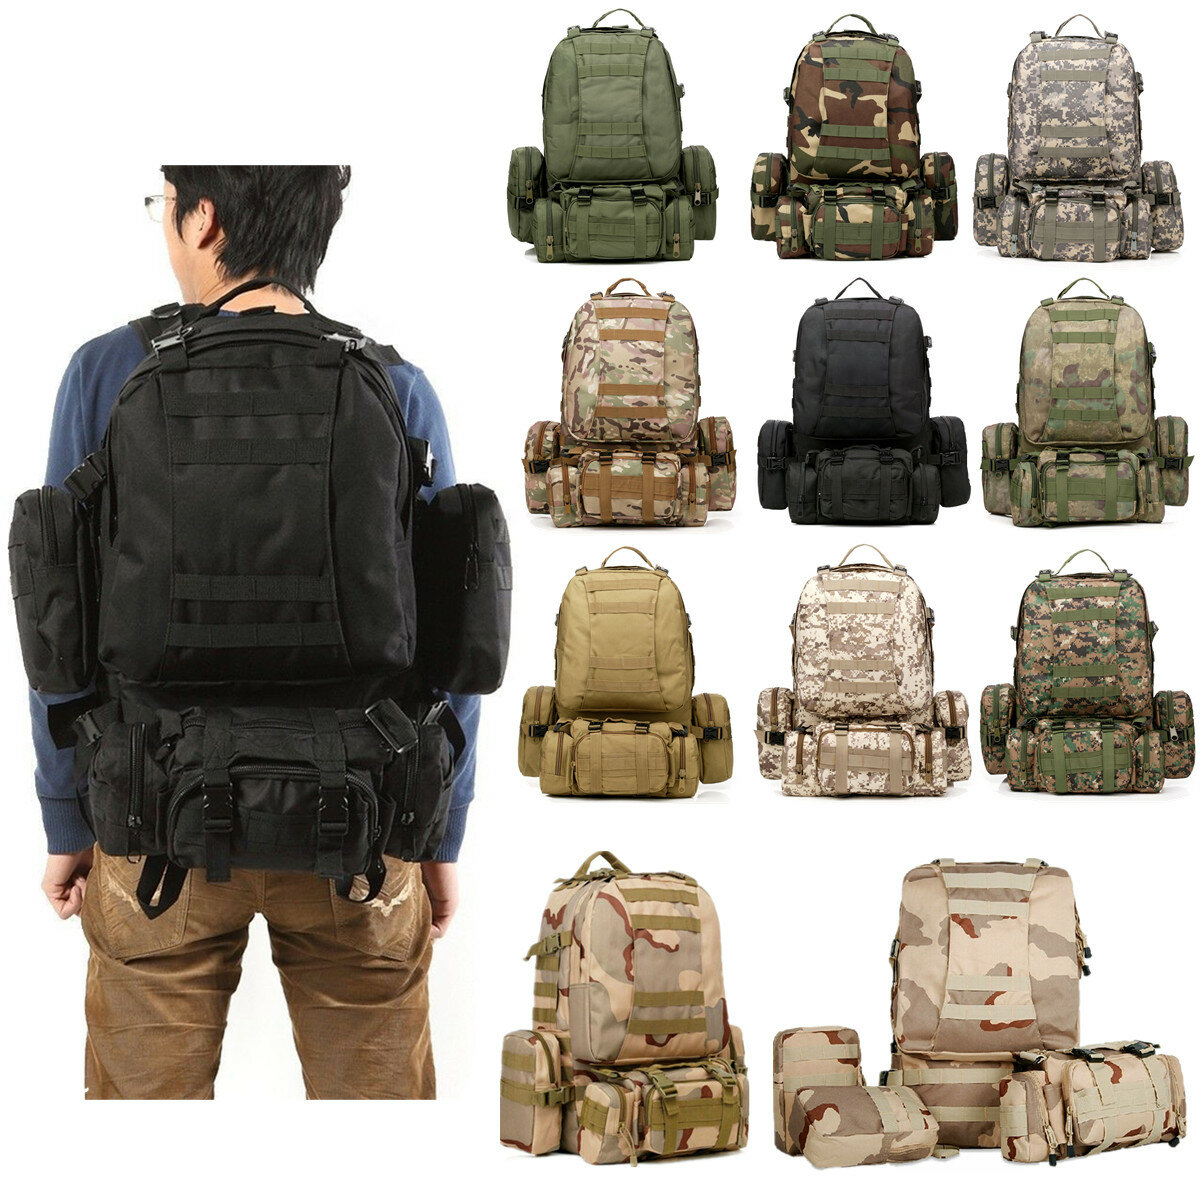 Link Superficial Eco friendly 50L Outdoor Military Rucksacks Tactical Backpack Sports Camping Trekking  Hiking Sale - Banggood USA